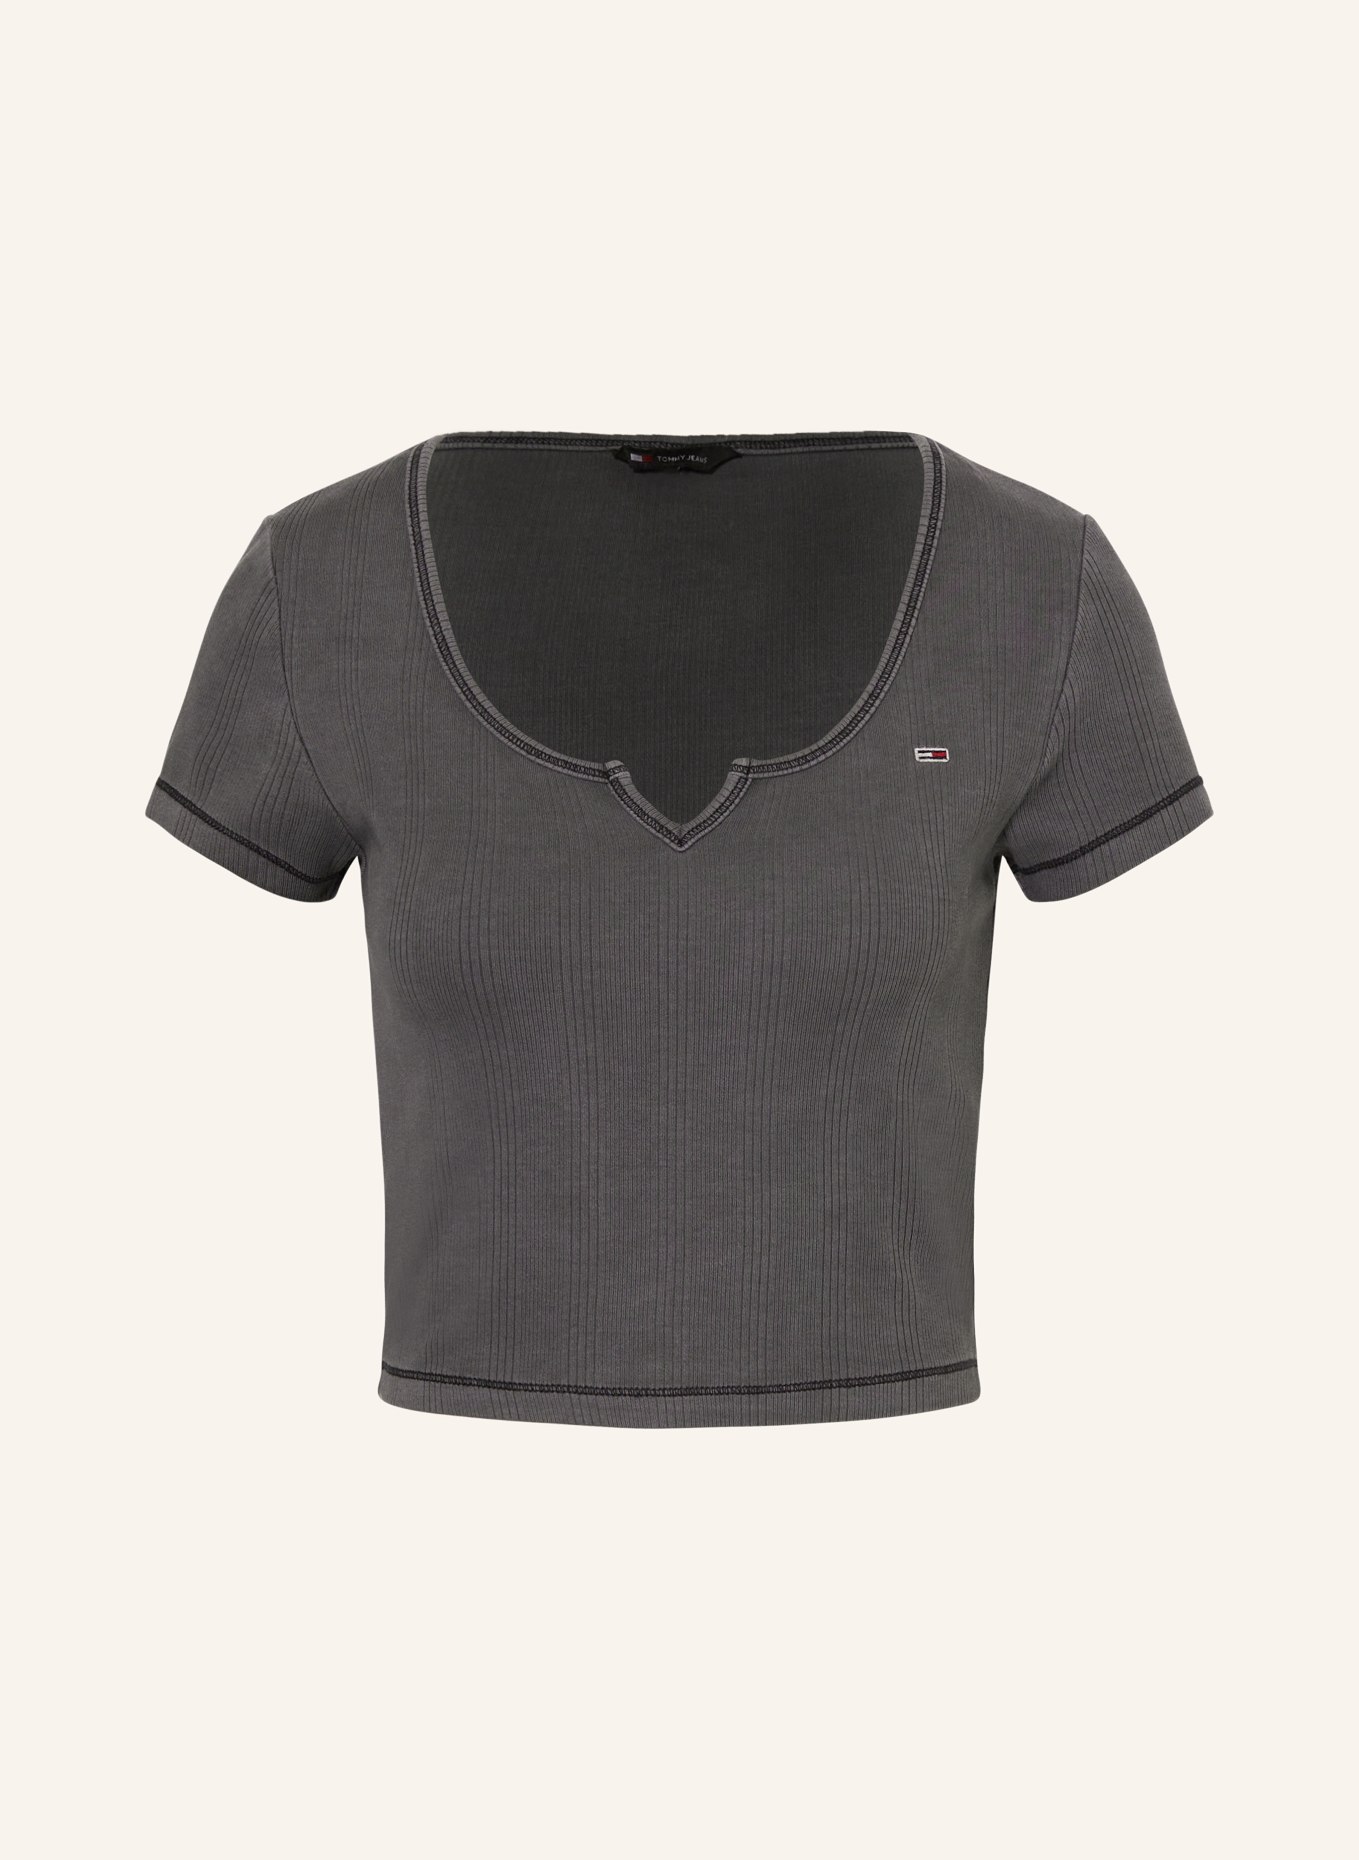 TOMMY JEANS Cropped-Shirt, Farbe: DUNKELGRAU (Bild 1)